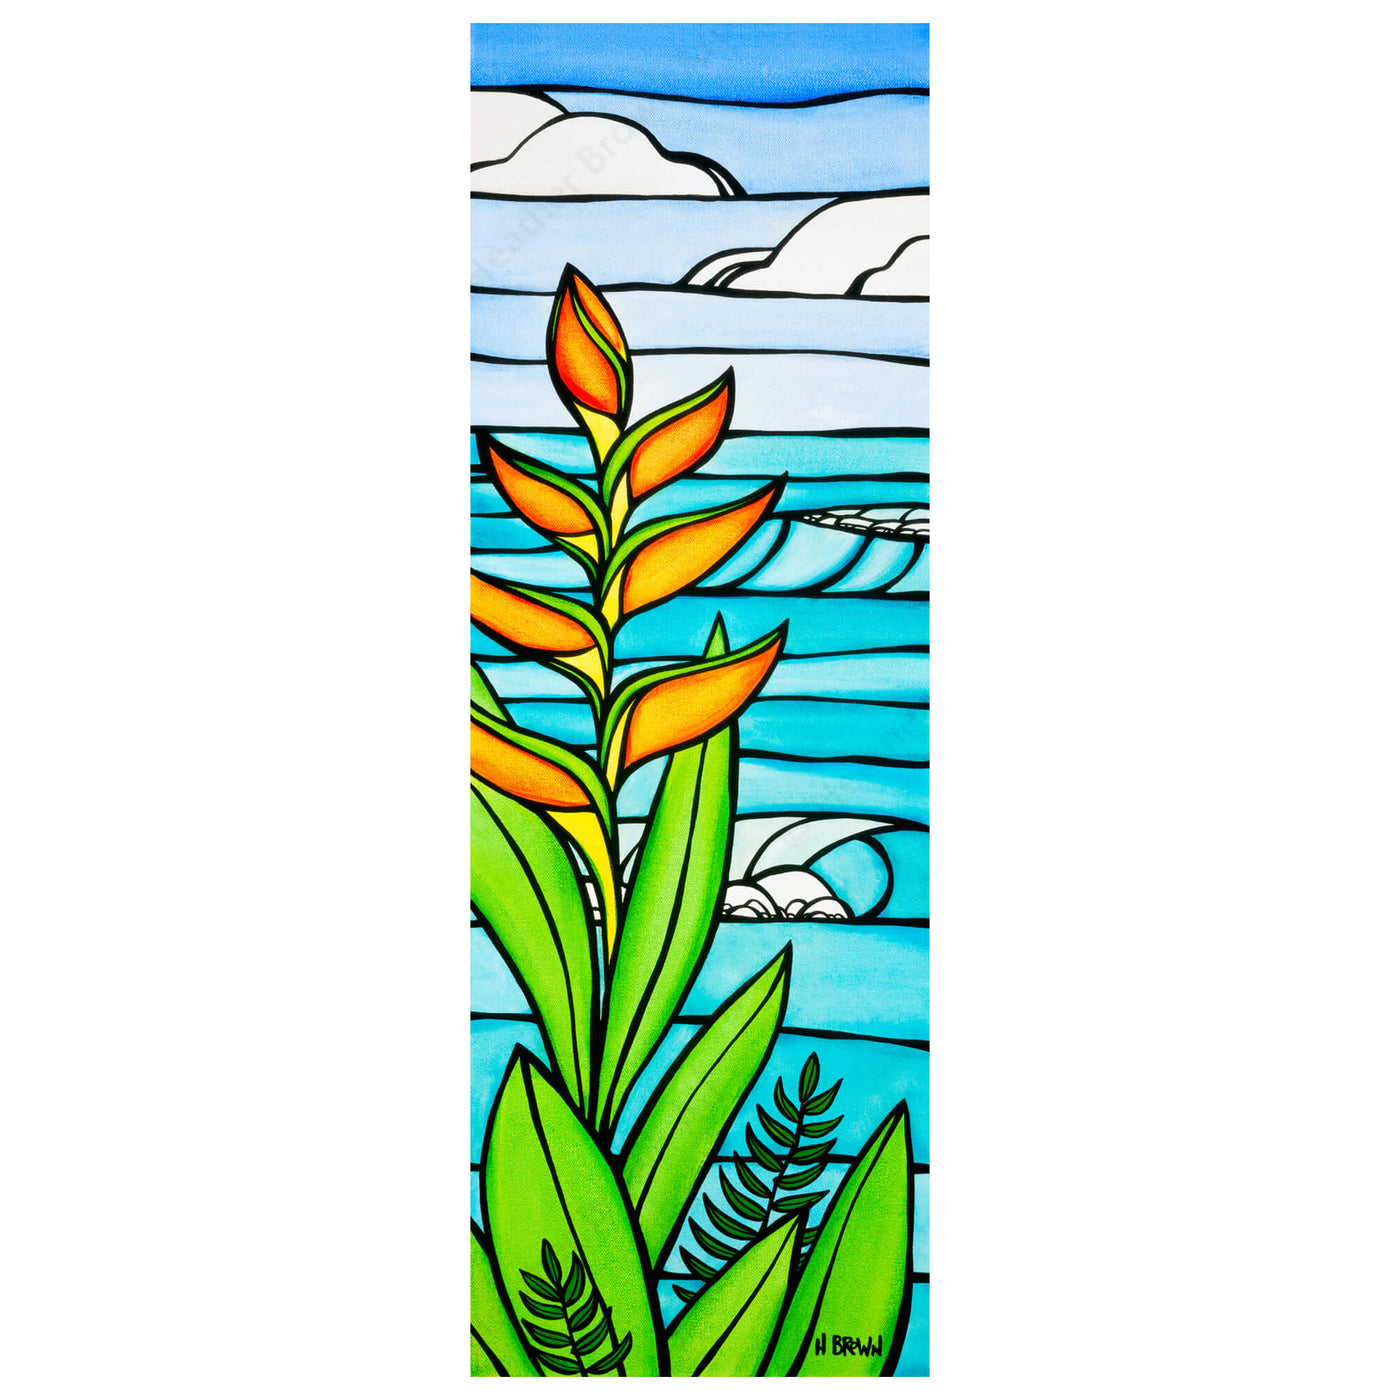 A matted art print featuring an idyllic view of the ocean framed by Heliconia flowers by Hawaii surf artist Heather Brown